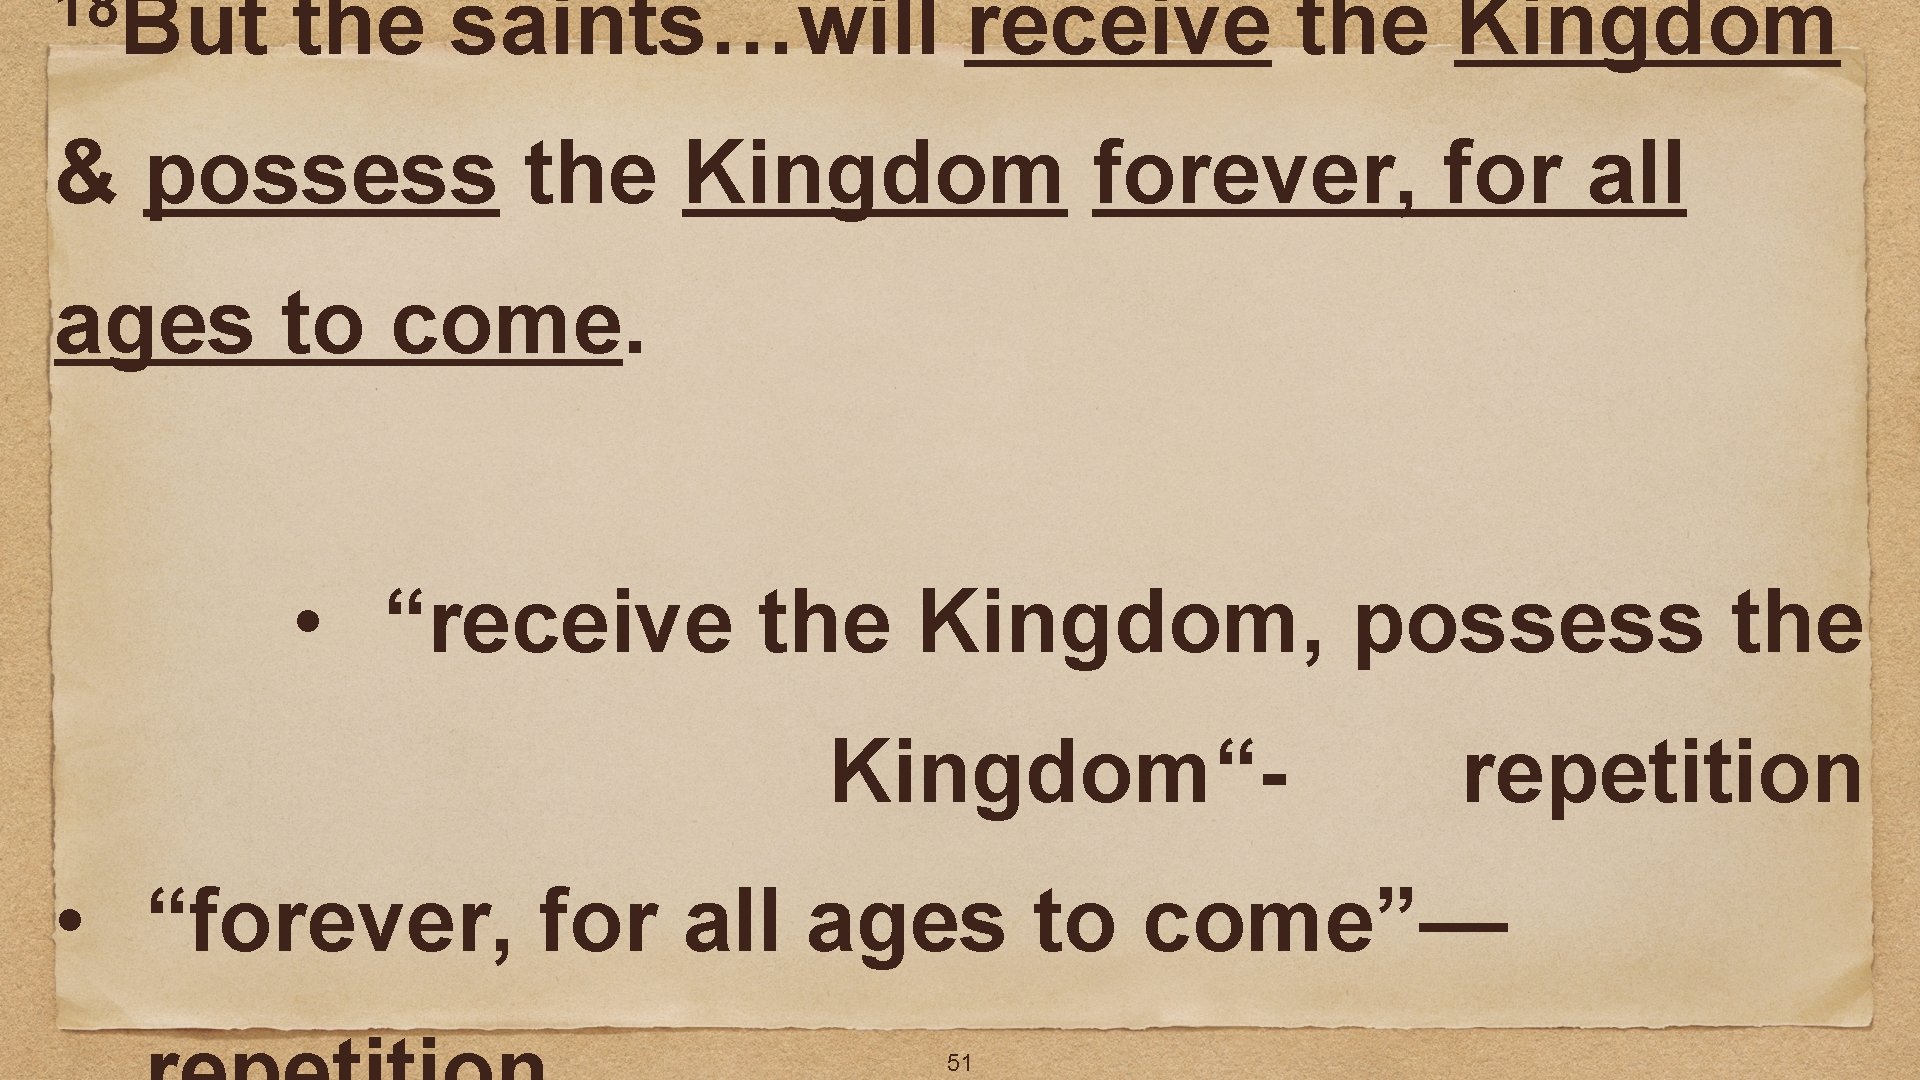 18 But the saints…will receive the Kingdom & possess the Kingdom forever, for all